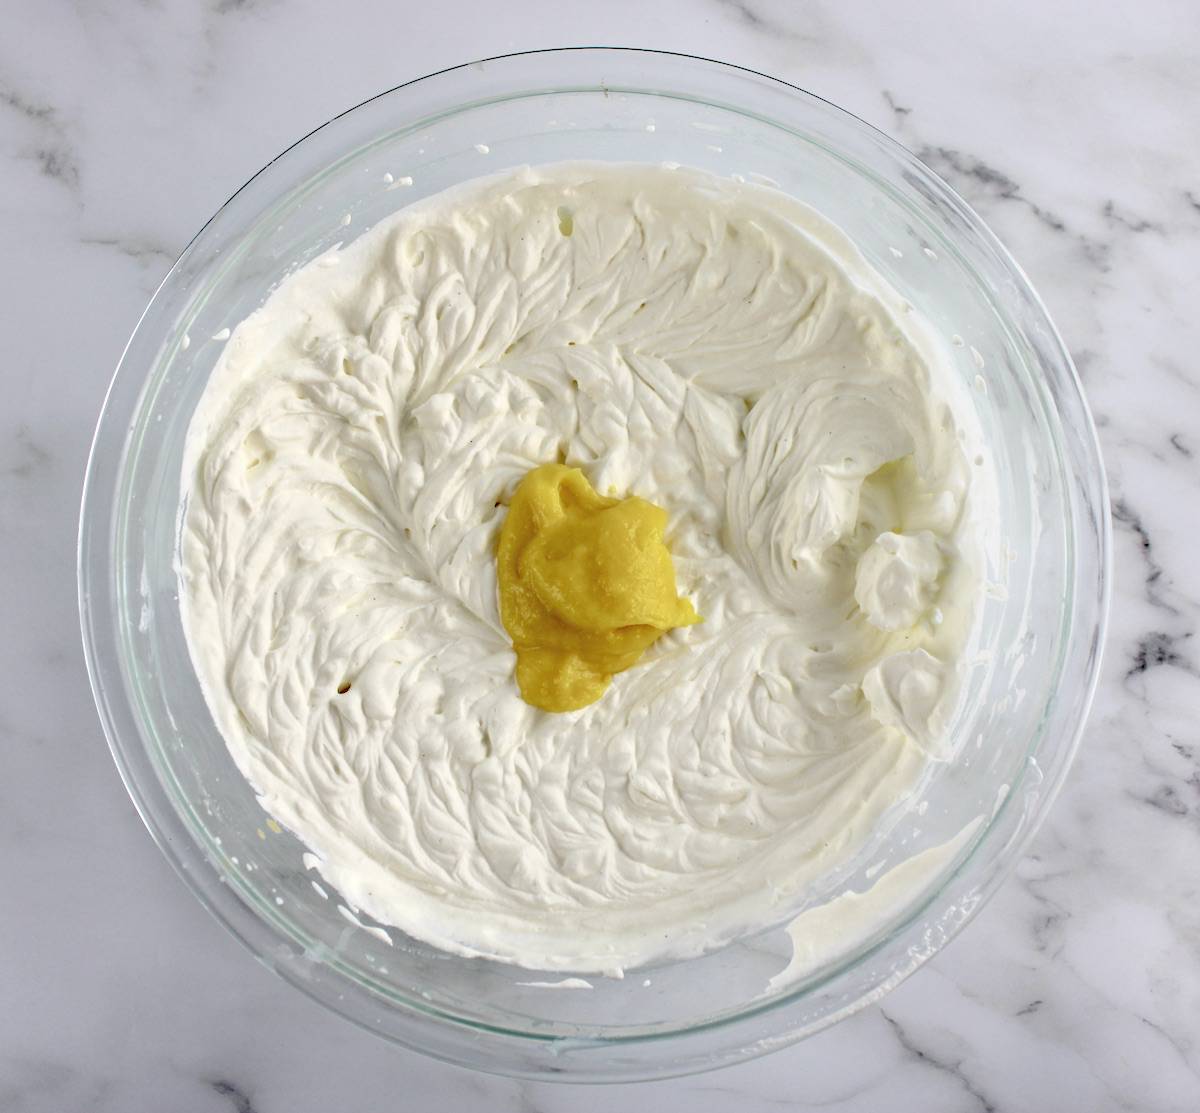 whip cream with dollop of lemon curd in center